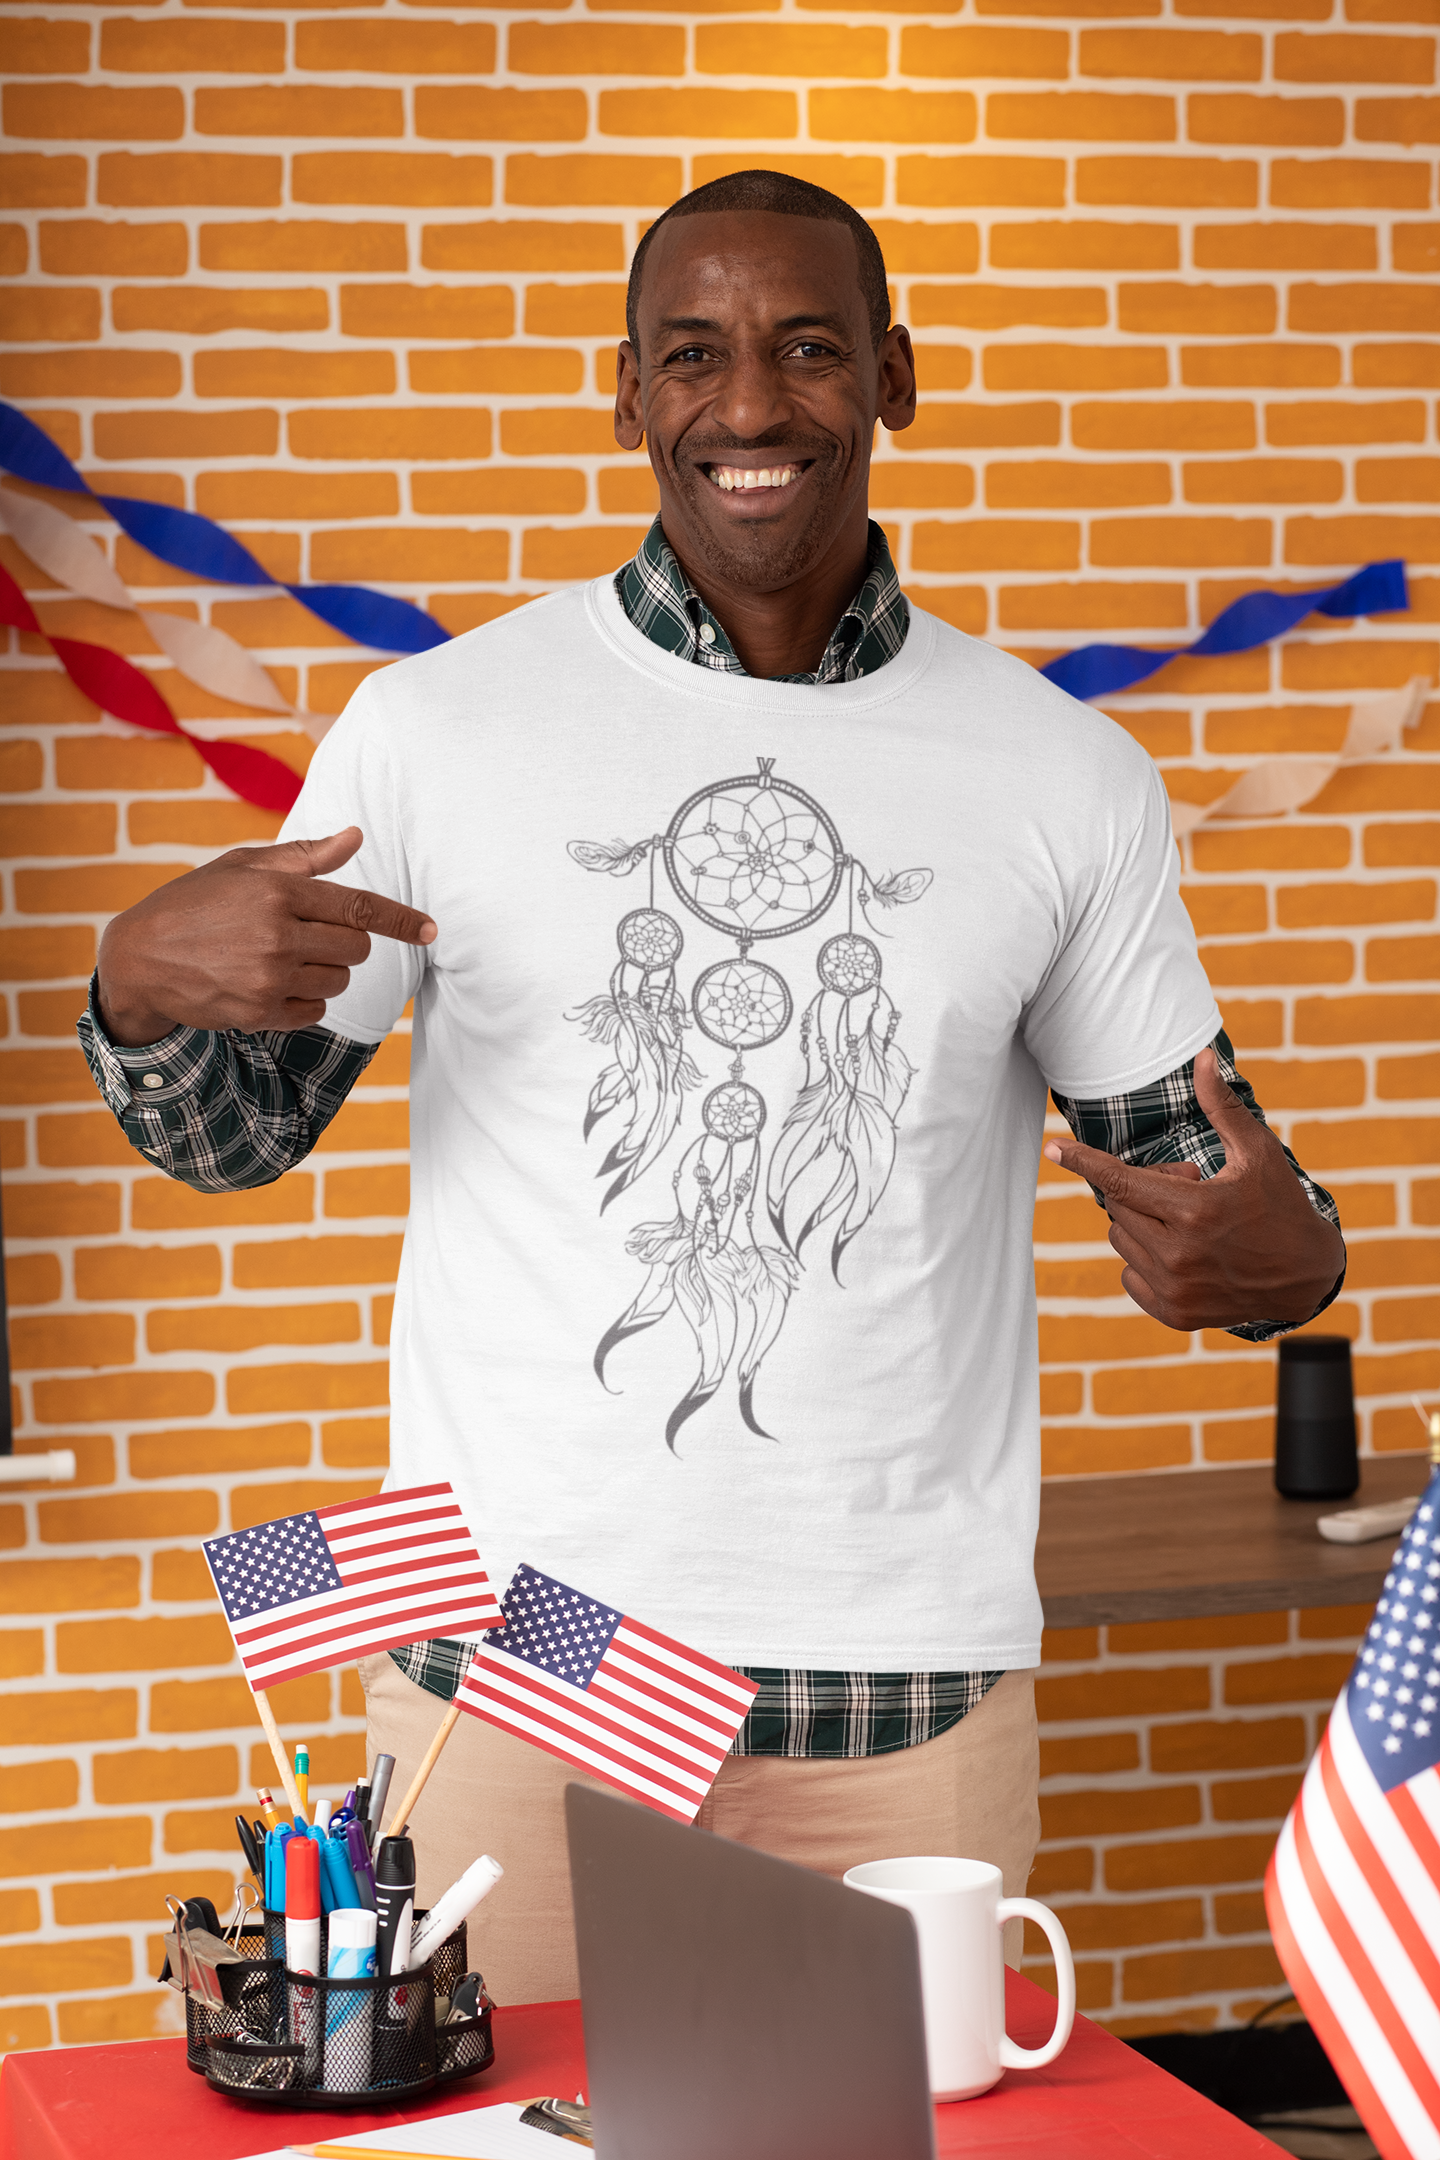 mockup-of-a-man-pointing-at-his-t-shirt-with-a-political-slogan-31932.png